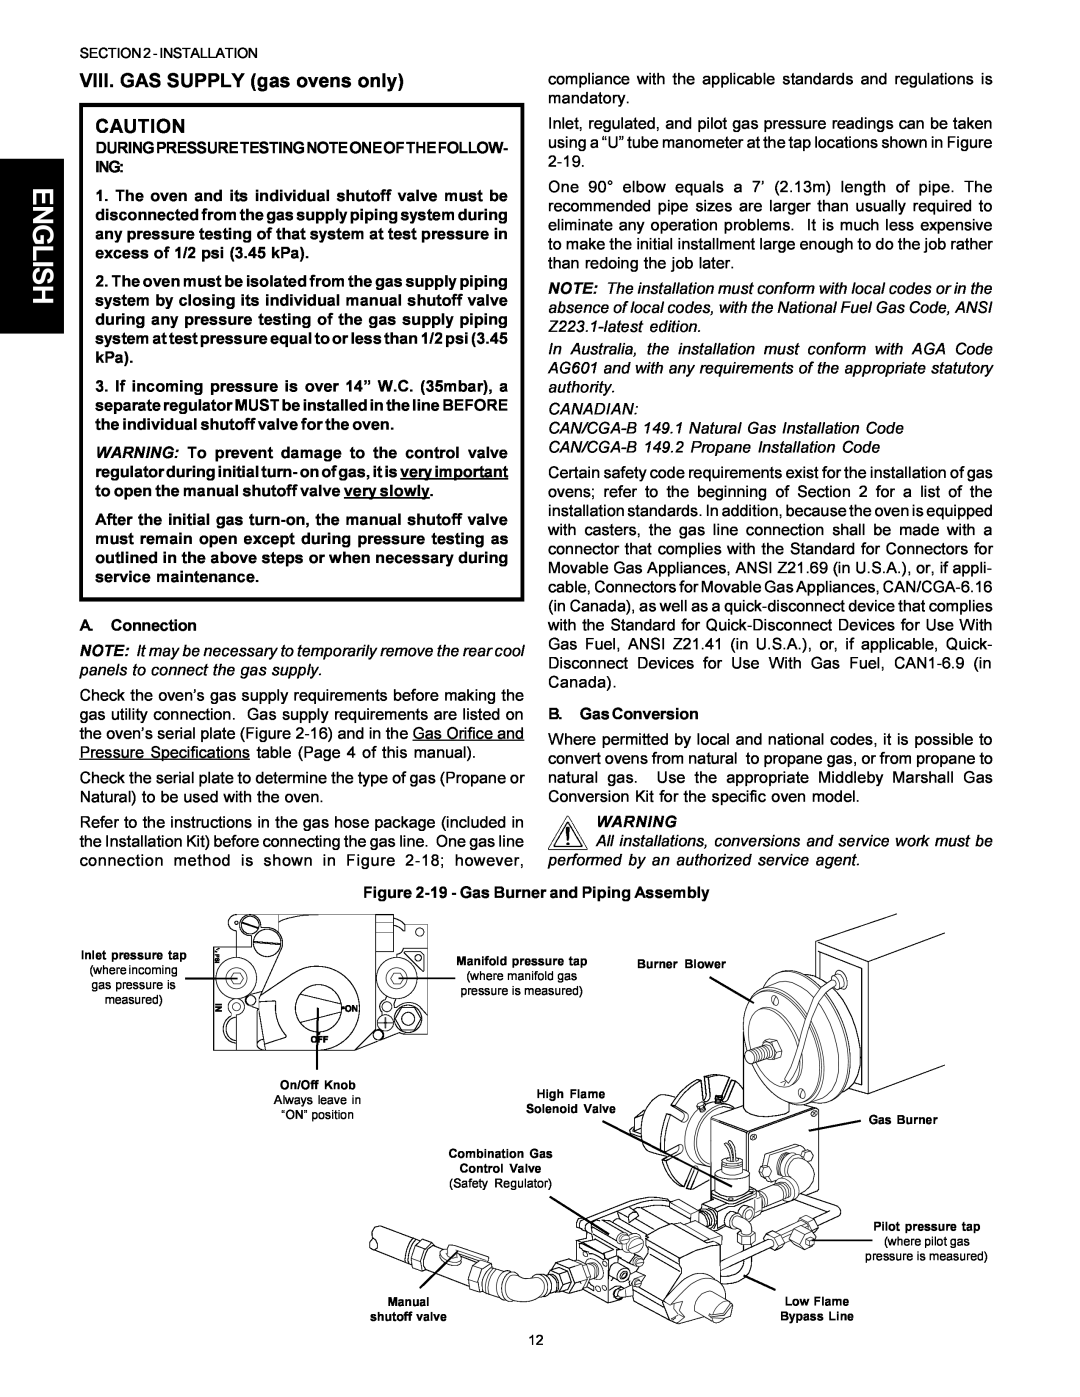 Middleby Marshall PS314SBI installation manual English, VIII. GAS SUPPLY gas ovens only 